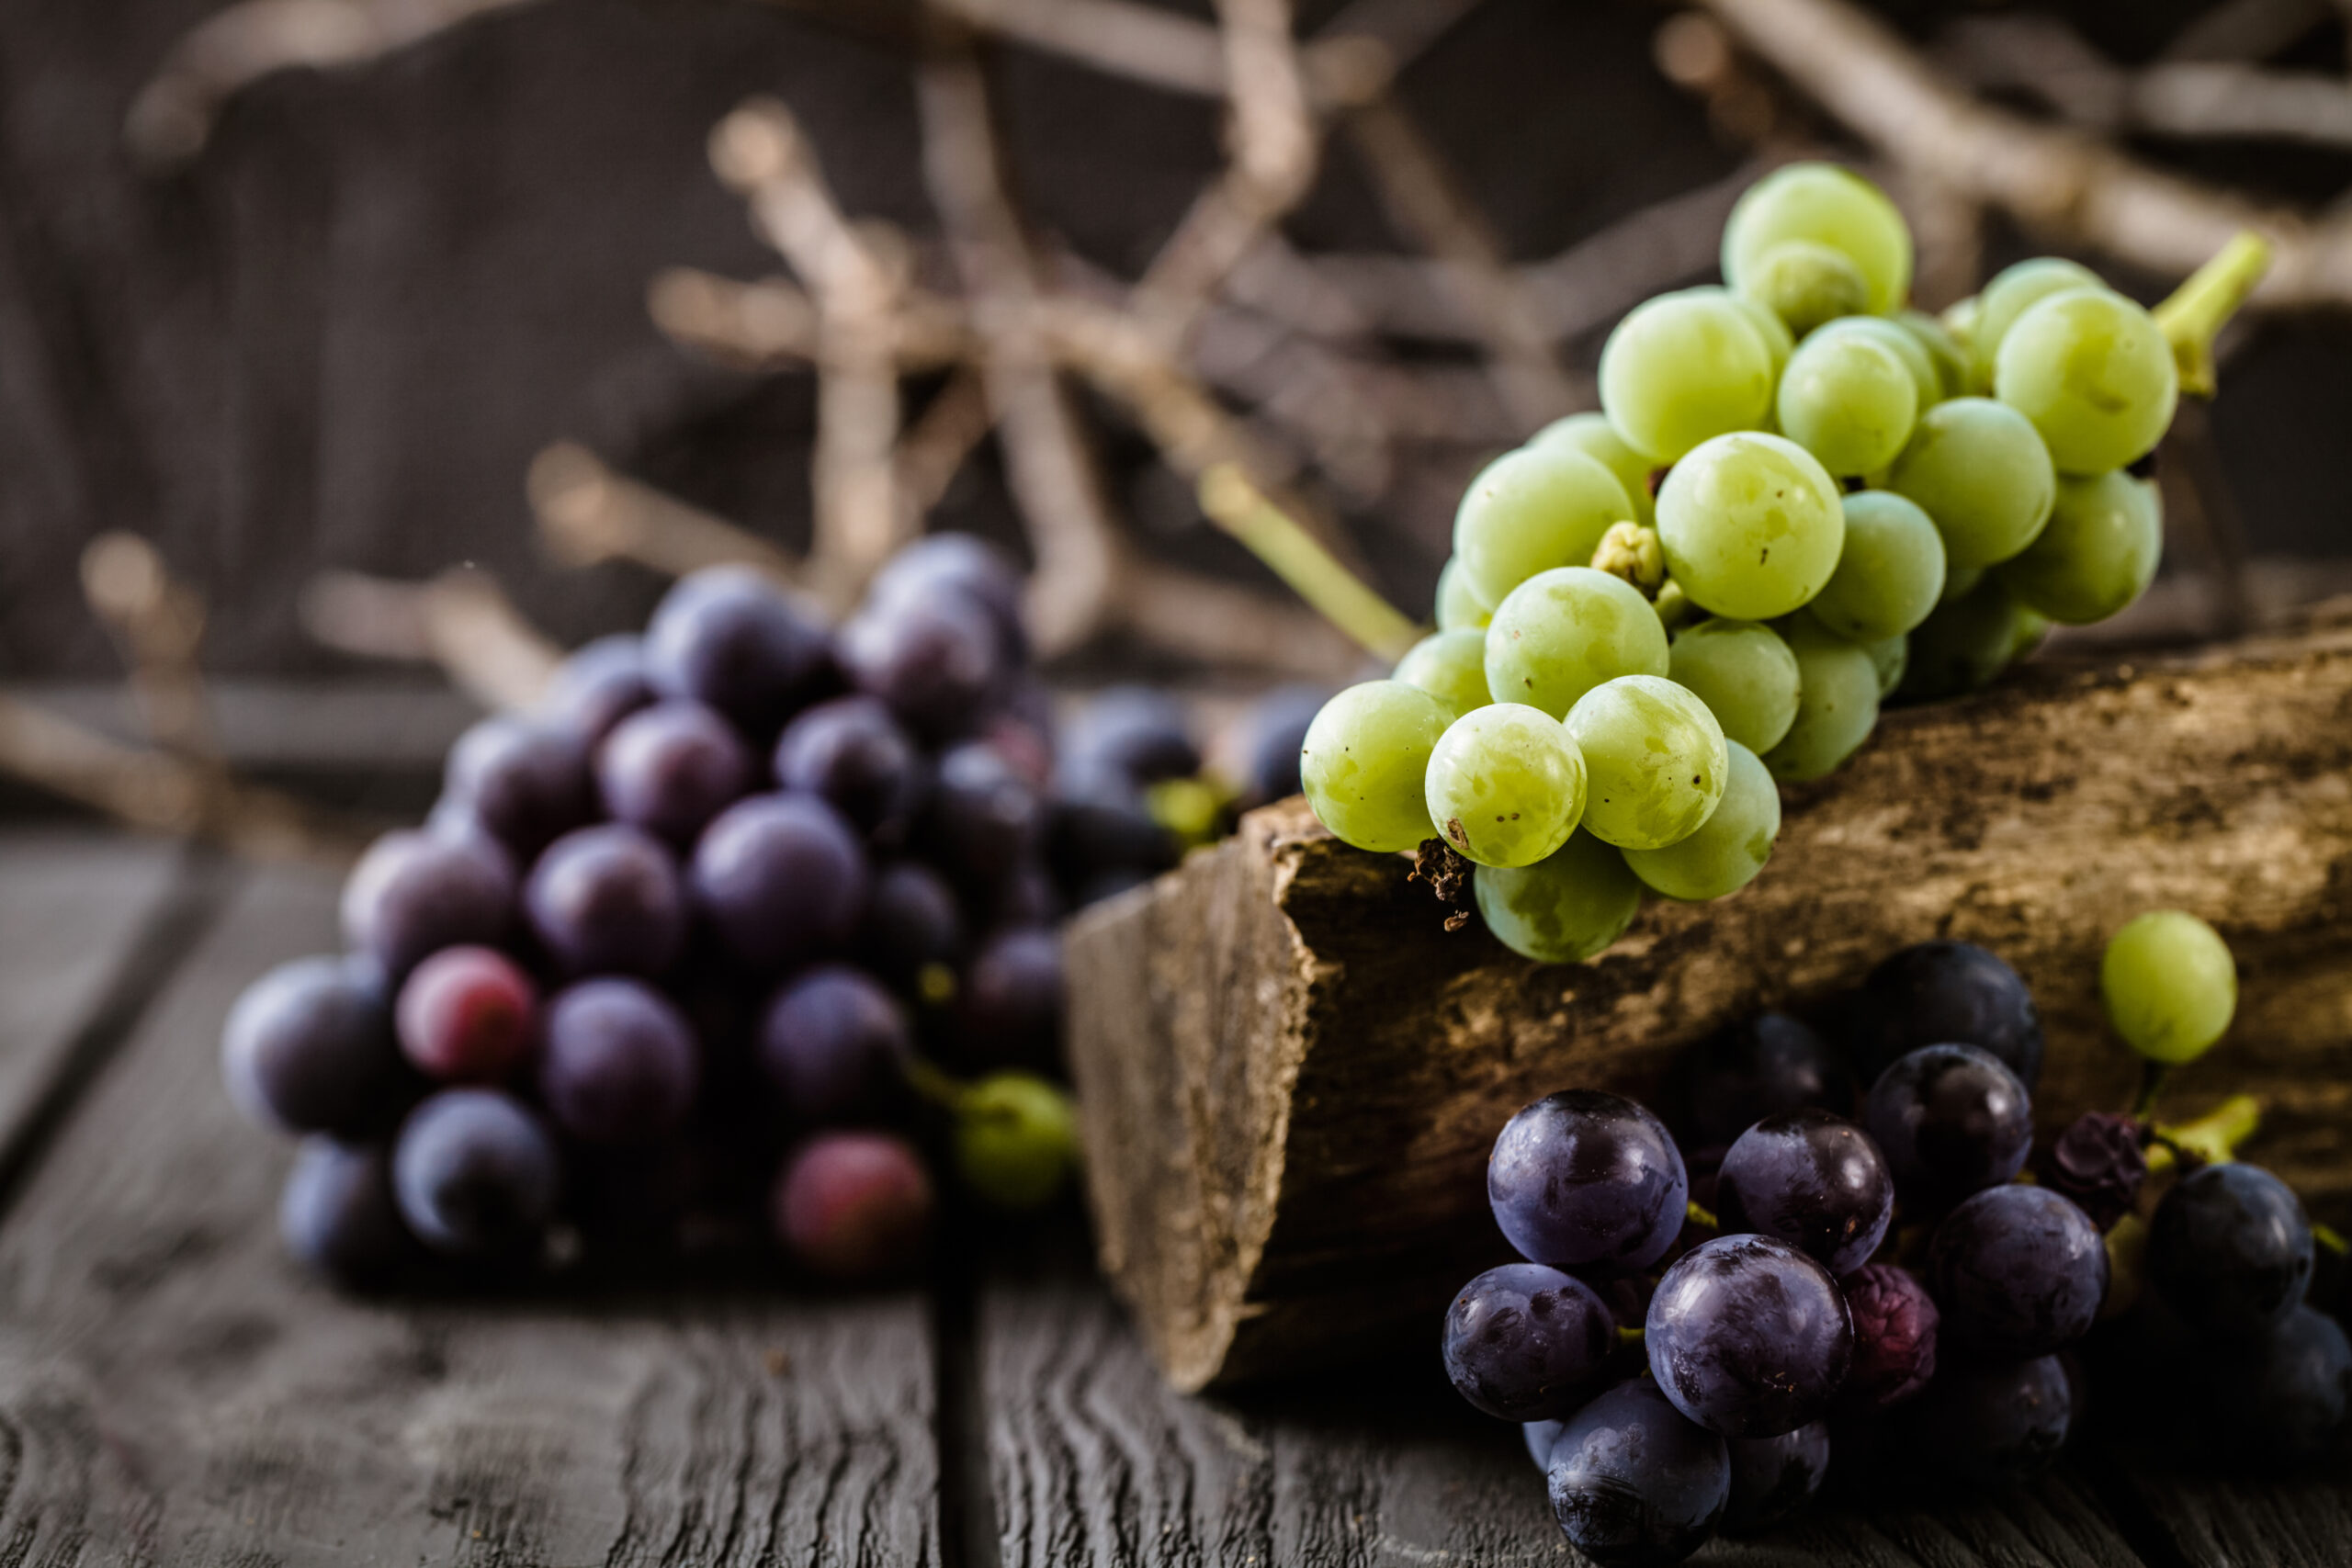 Grapes and a log on a wooden surface